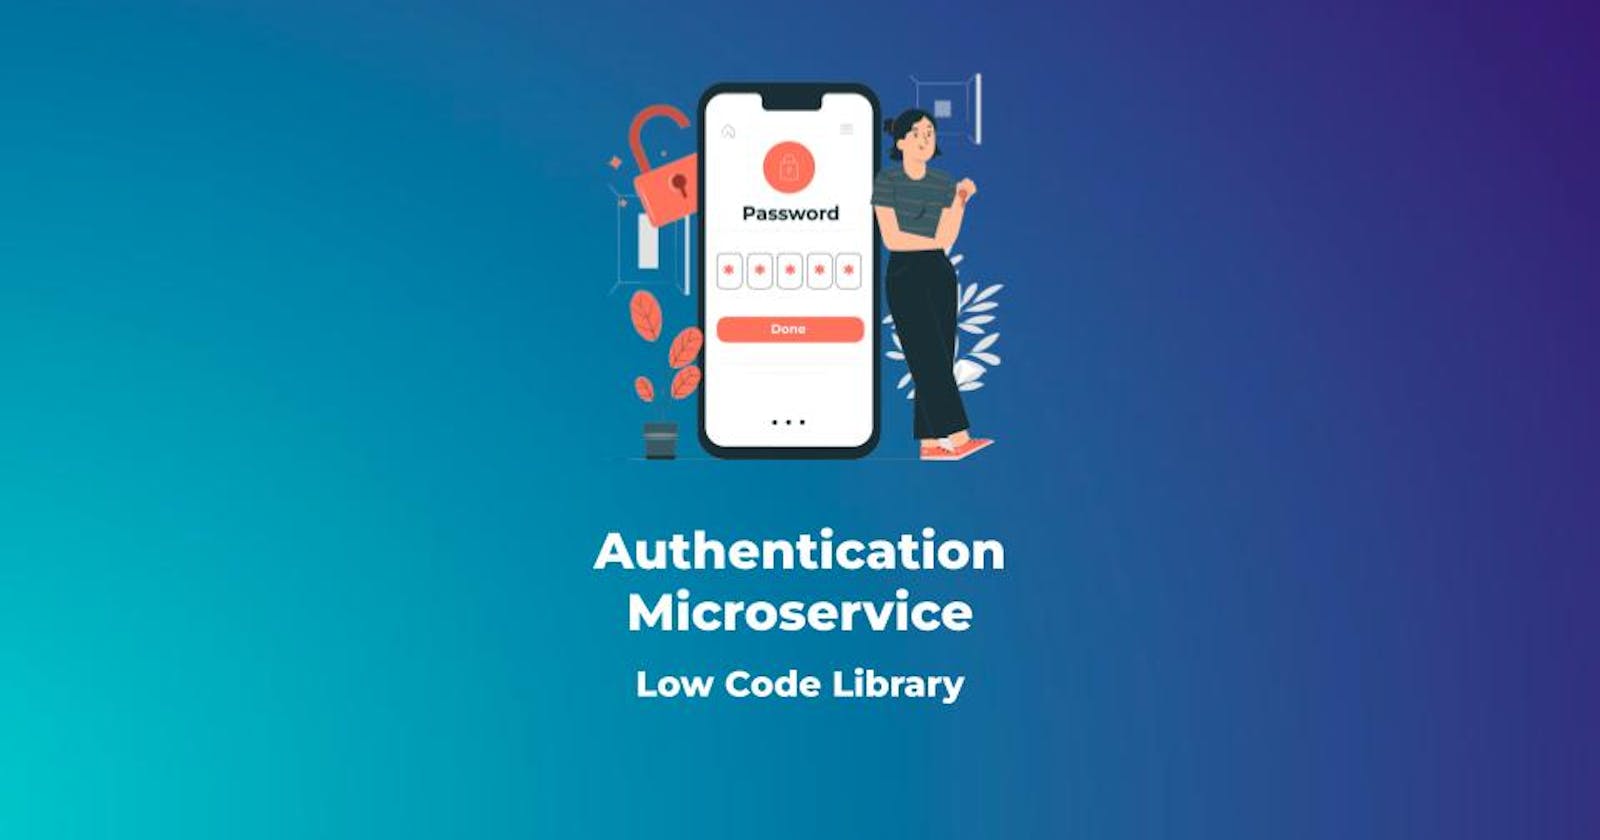 How To Add A Serverless Authentication Microservice To Your HTML, CSS & Javascript App